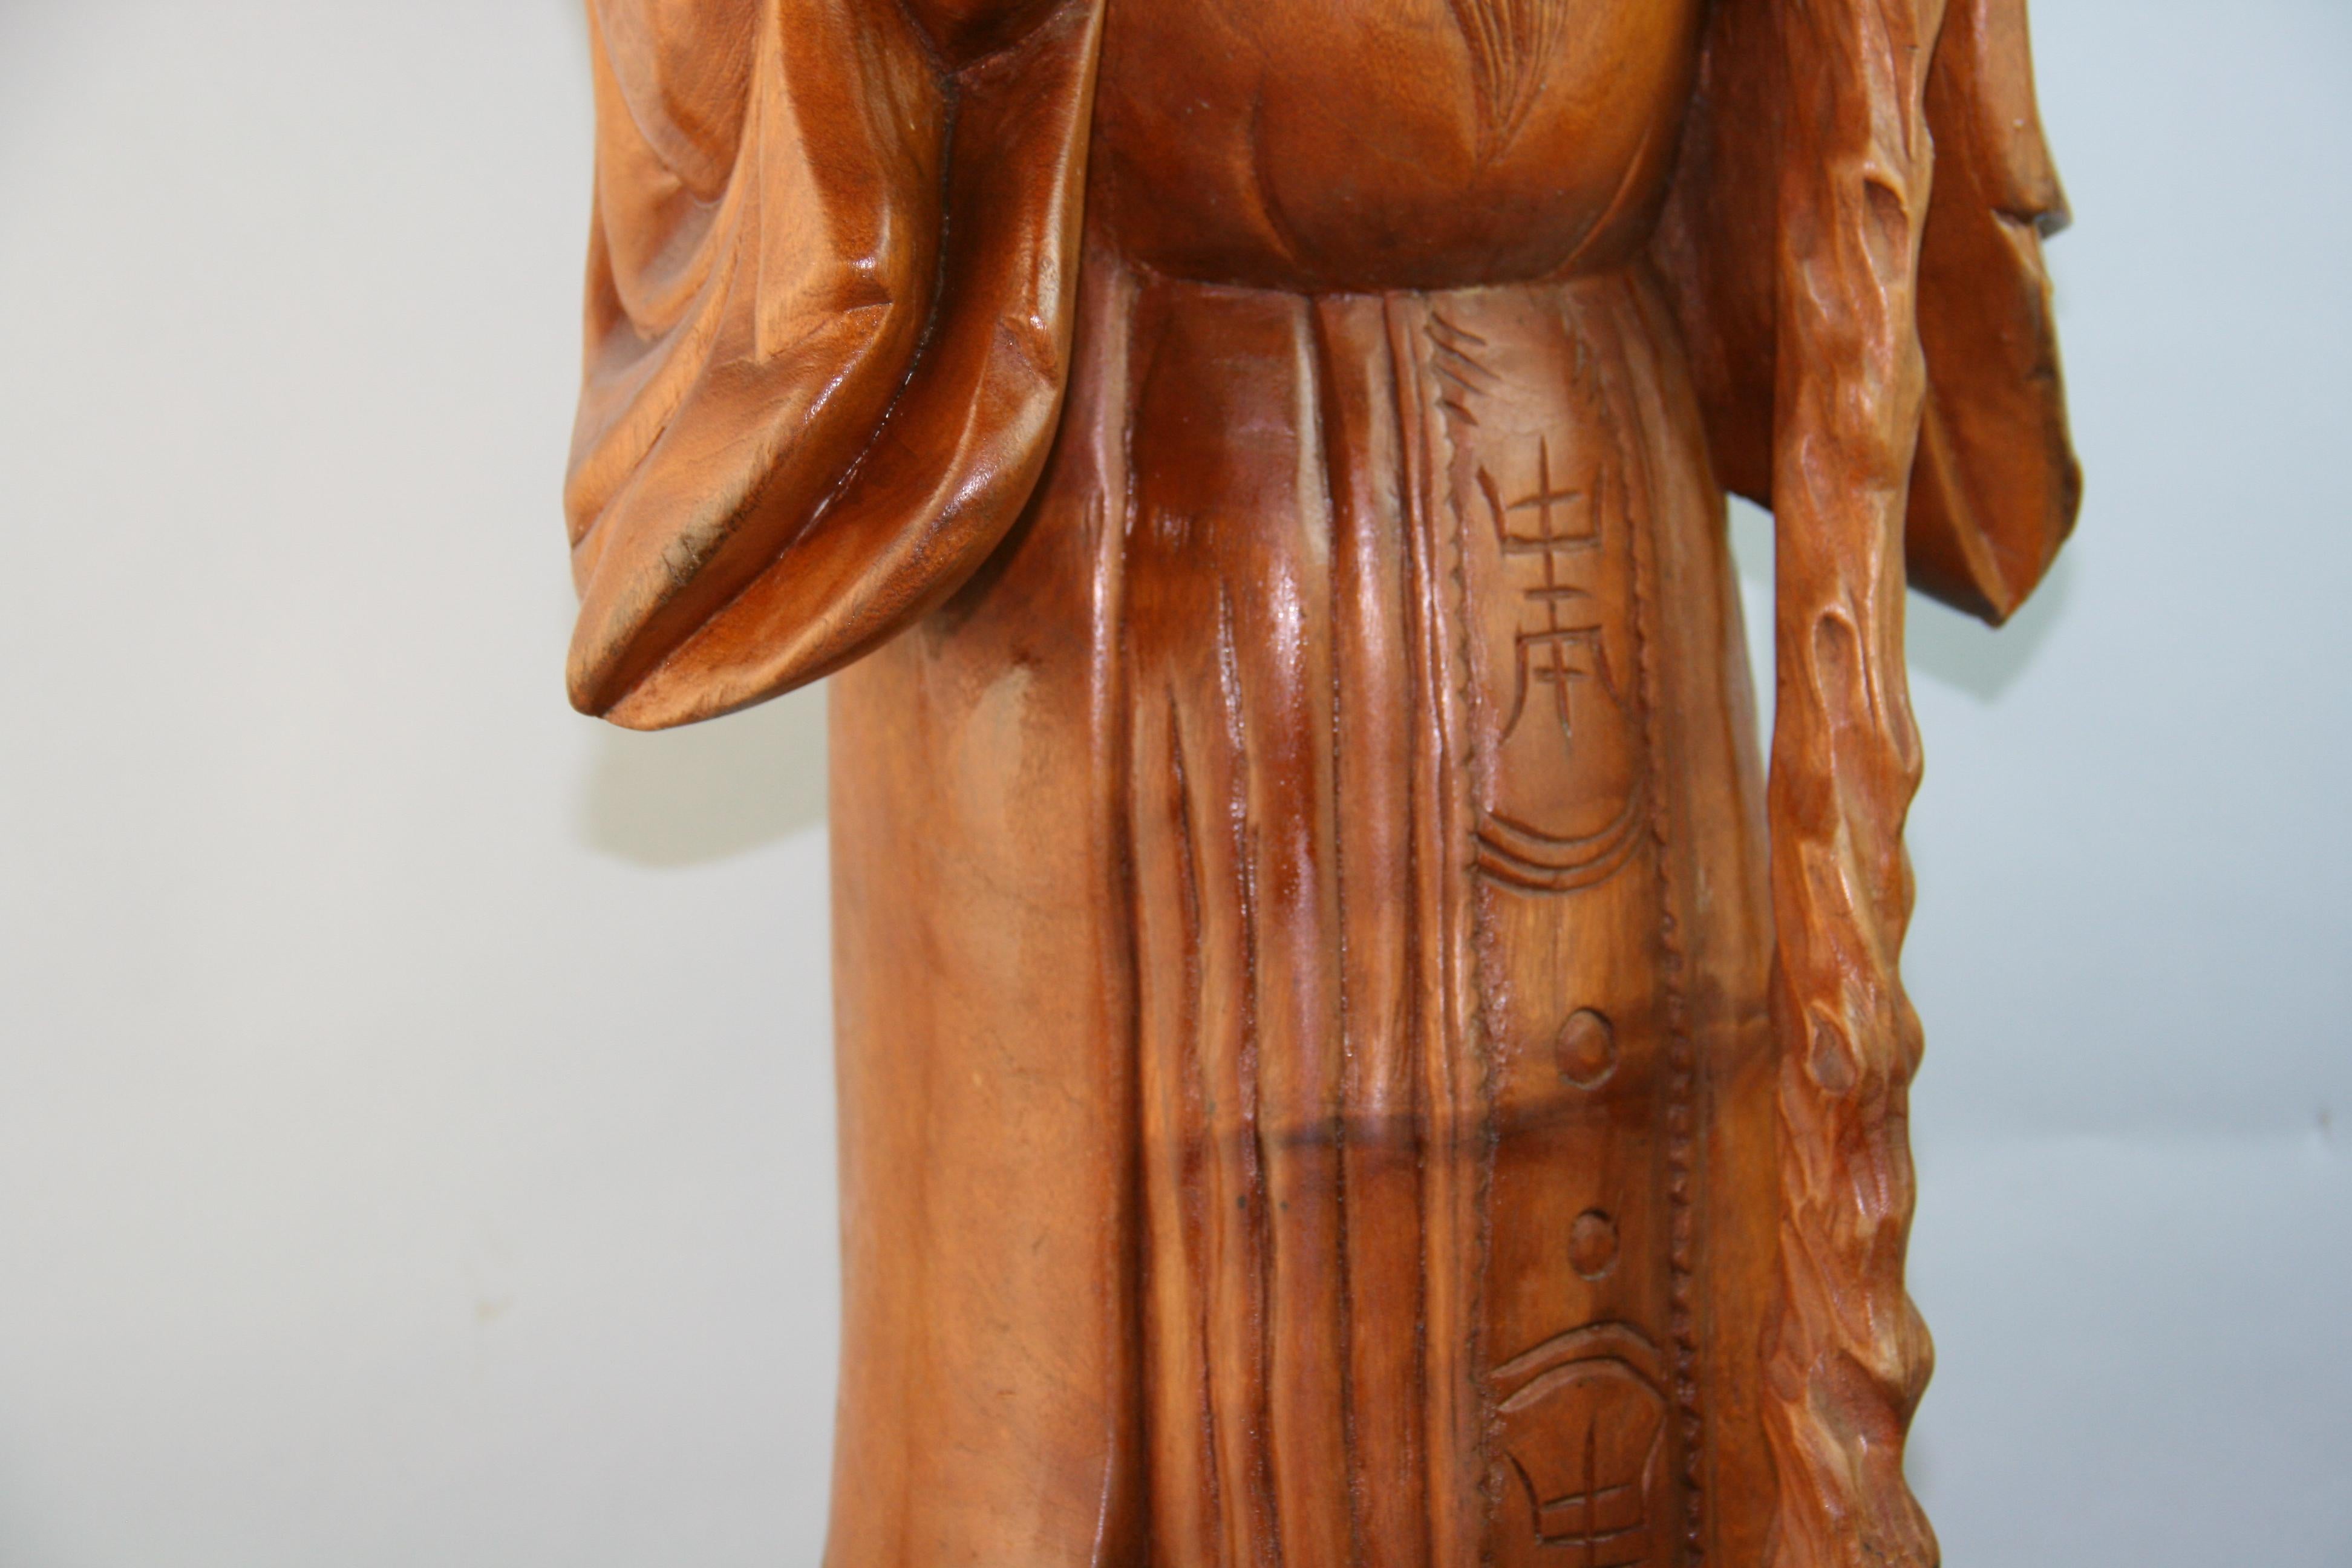 Japanese Oversized Wise Buddha Hand Carved Boxwood Sculpture Early 20th Century For Sale 1